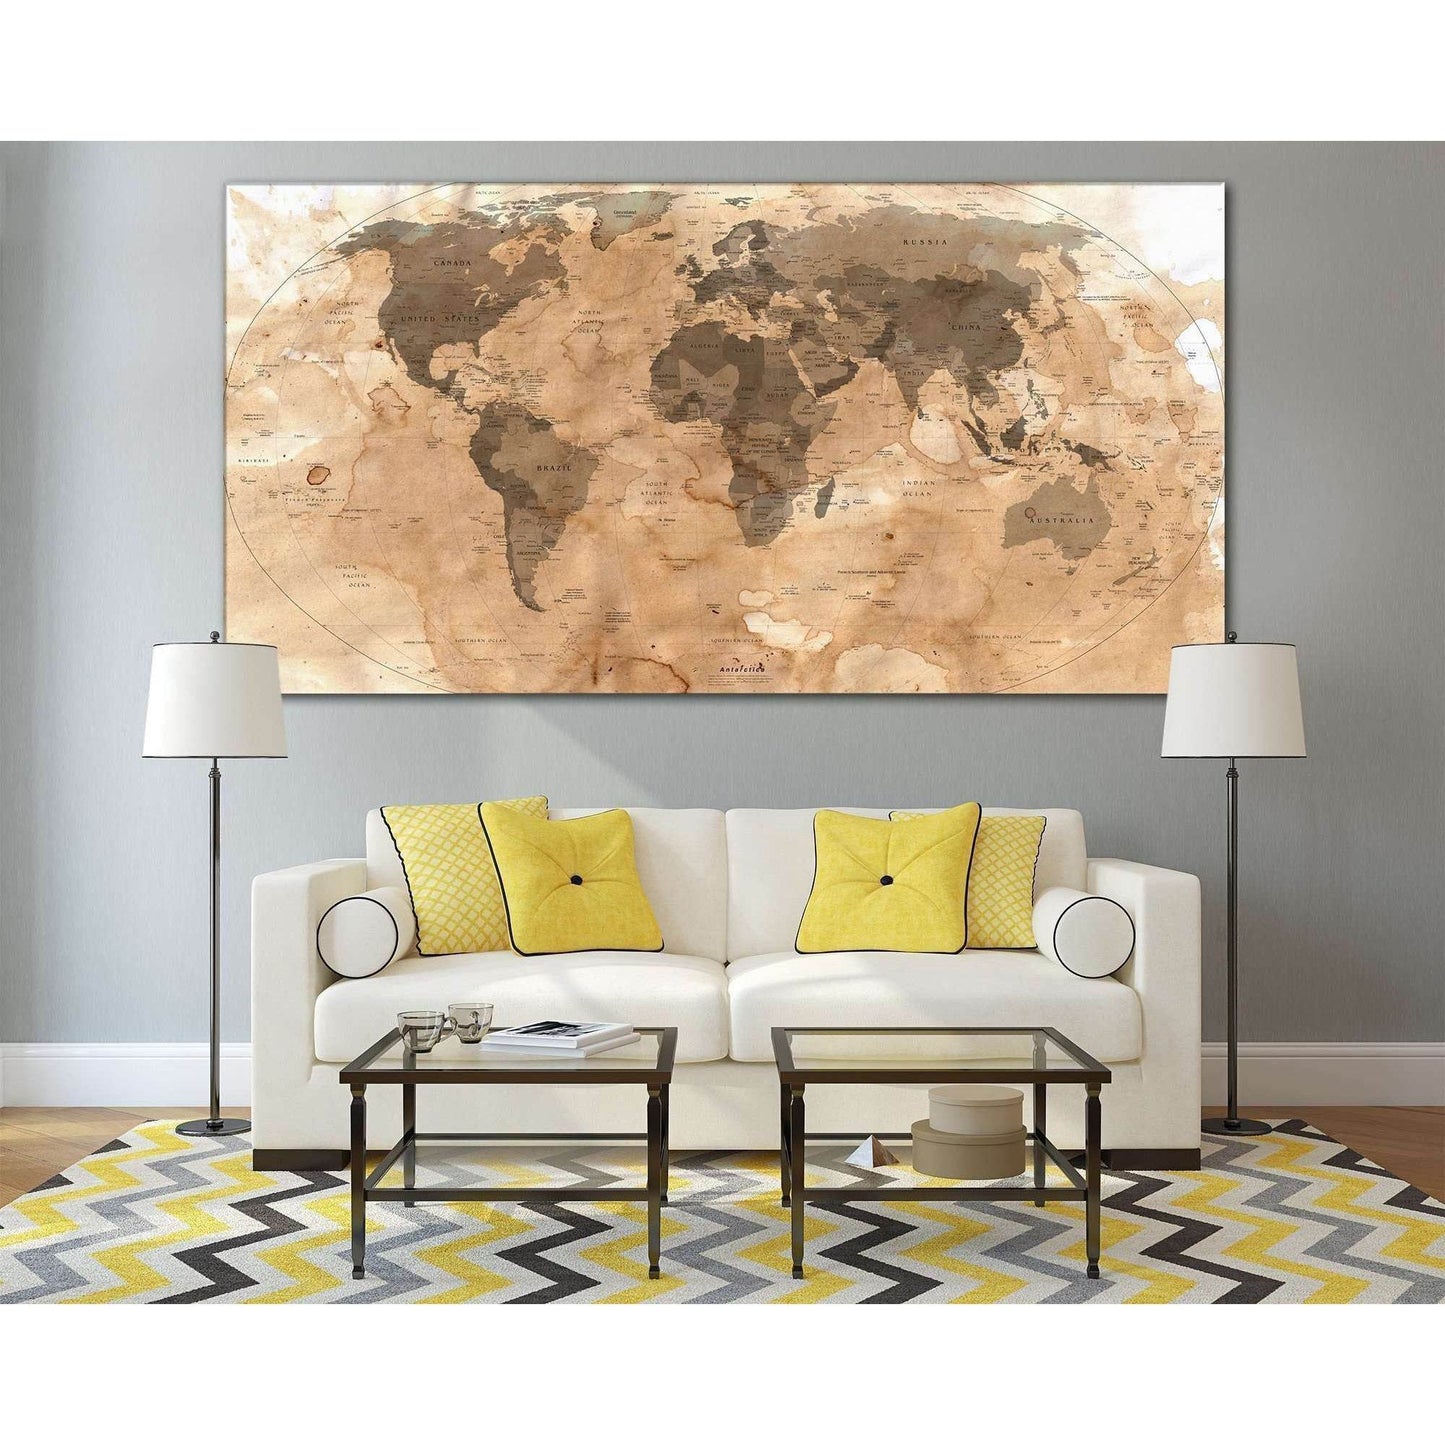 Rustic Travel World Map Canvas PrintDecorate your walls with a stunning Rustic World Map Canvas Art Print from the world's largest art gallery. Choose from thousands of Travel Map artworks with various sizing options. Choose your perfect art print to comp